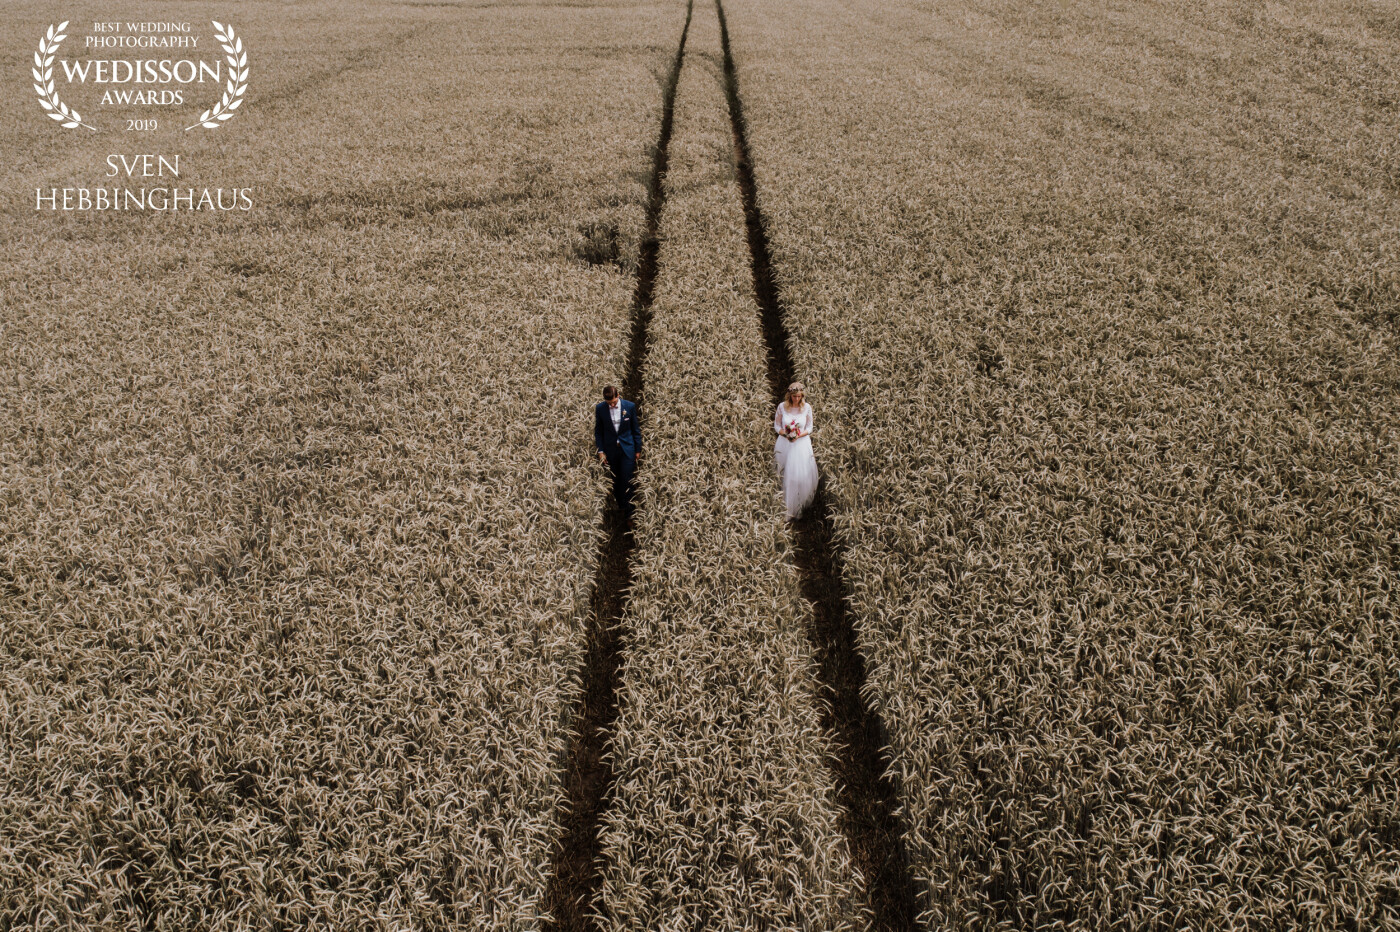 A beautiful walk in the field while the drone took a big picture. I like the point of view and the lines in the field. Mother earth is so nice.